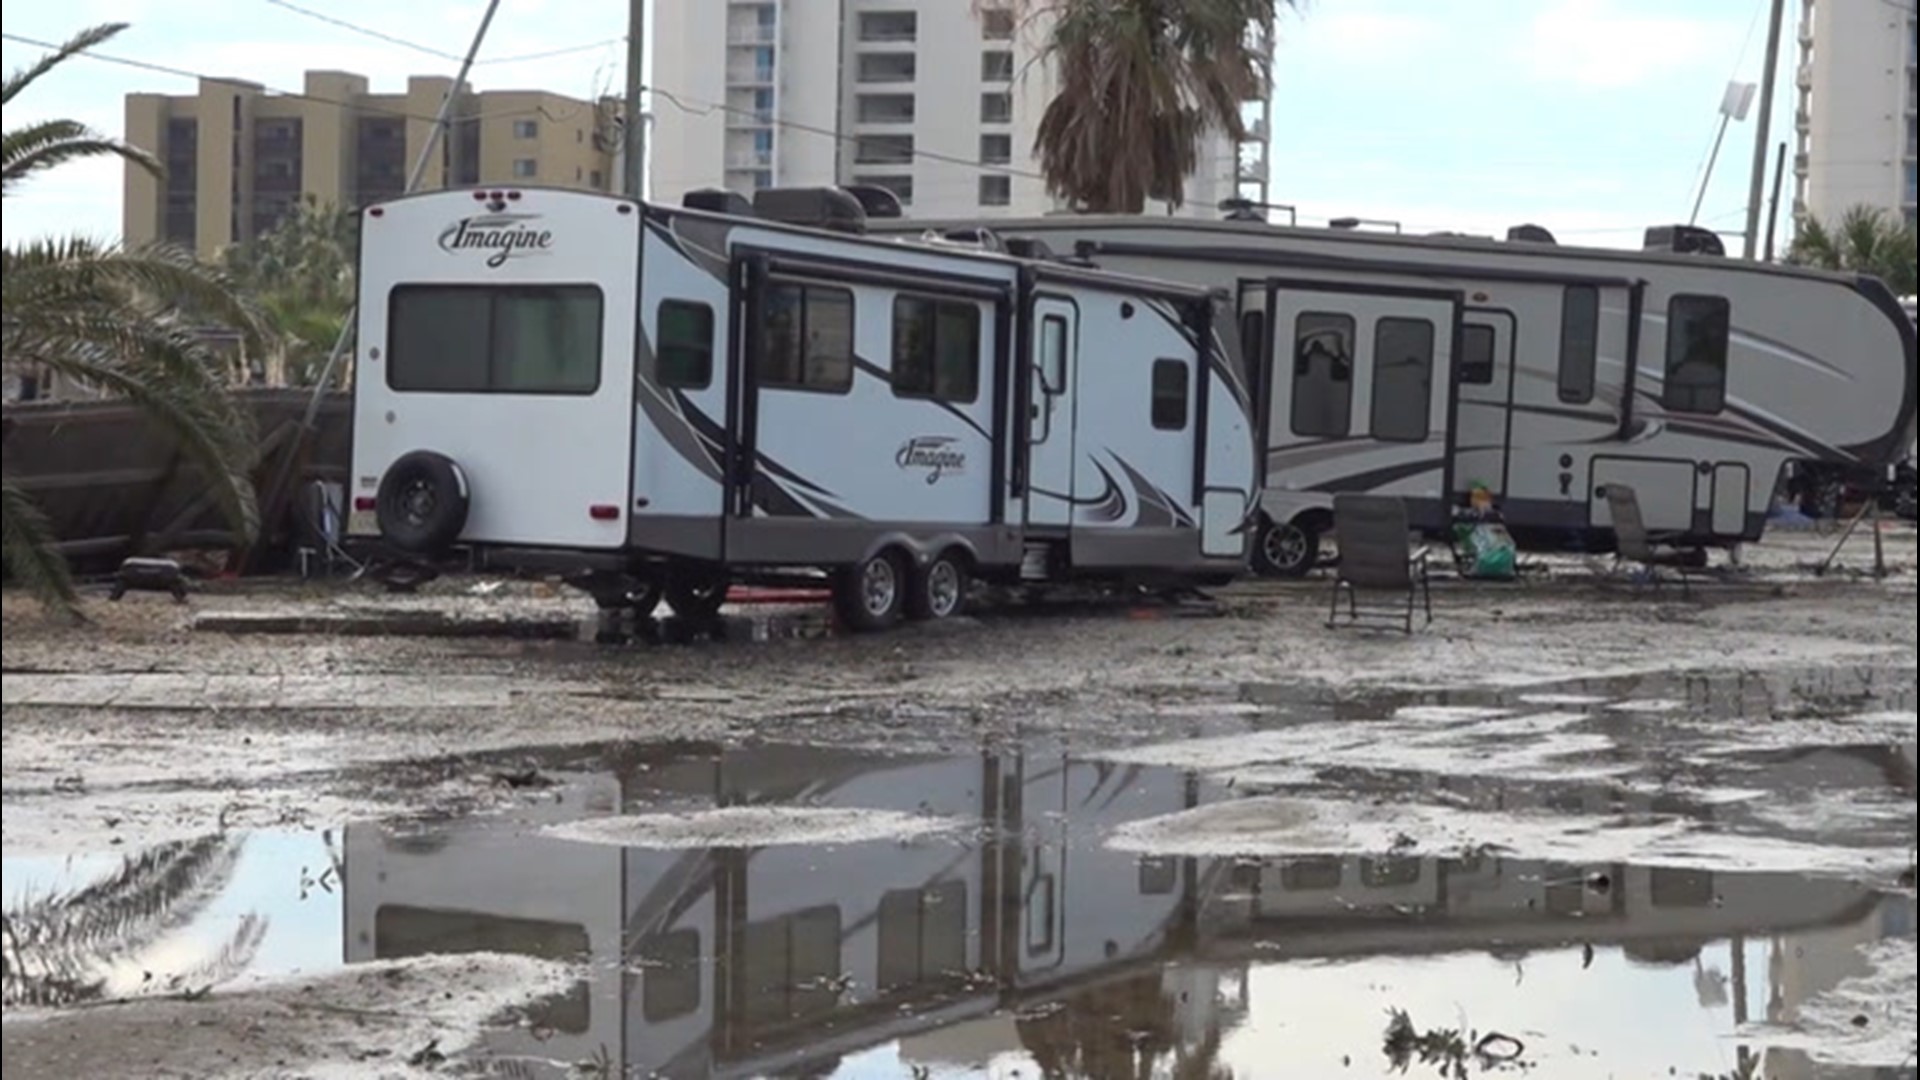 While other people evacuated or hid in a public restroom nearby, one man stayed in an RV near Pensacola when Hurricane Sally made landfall nearby.